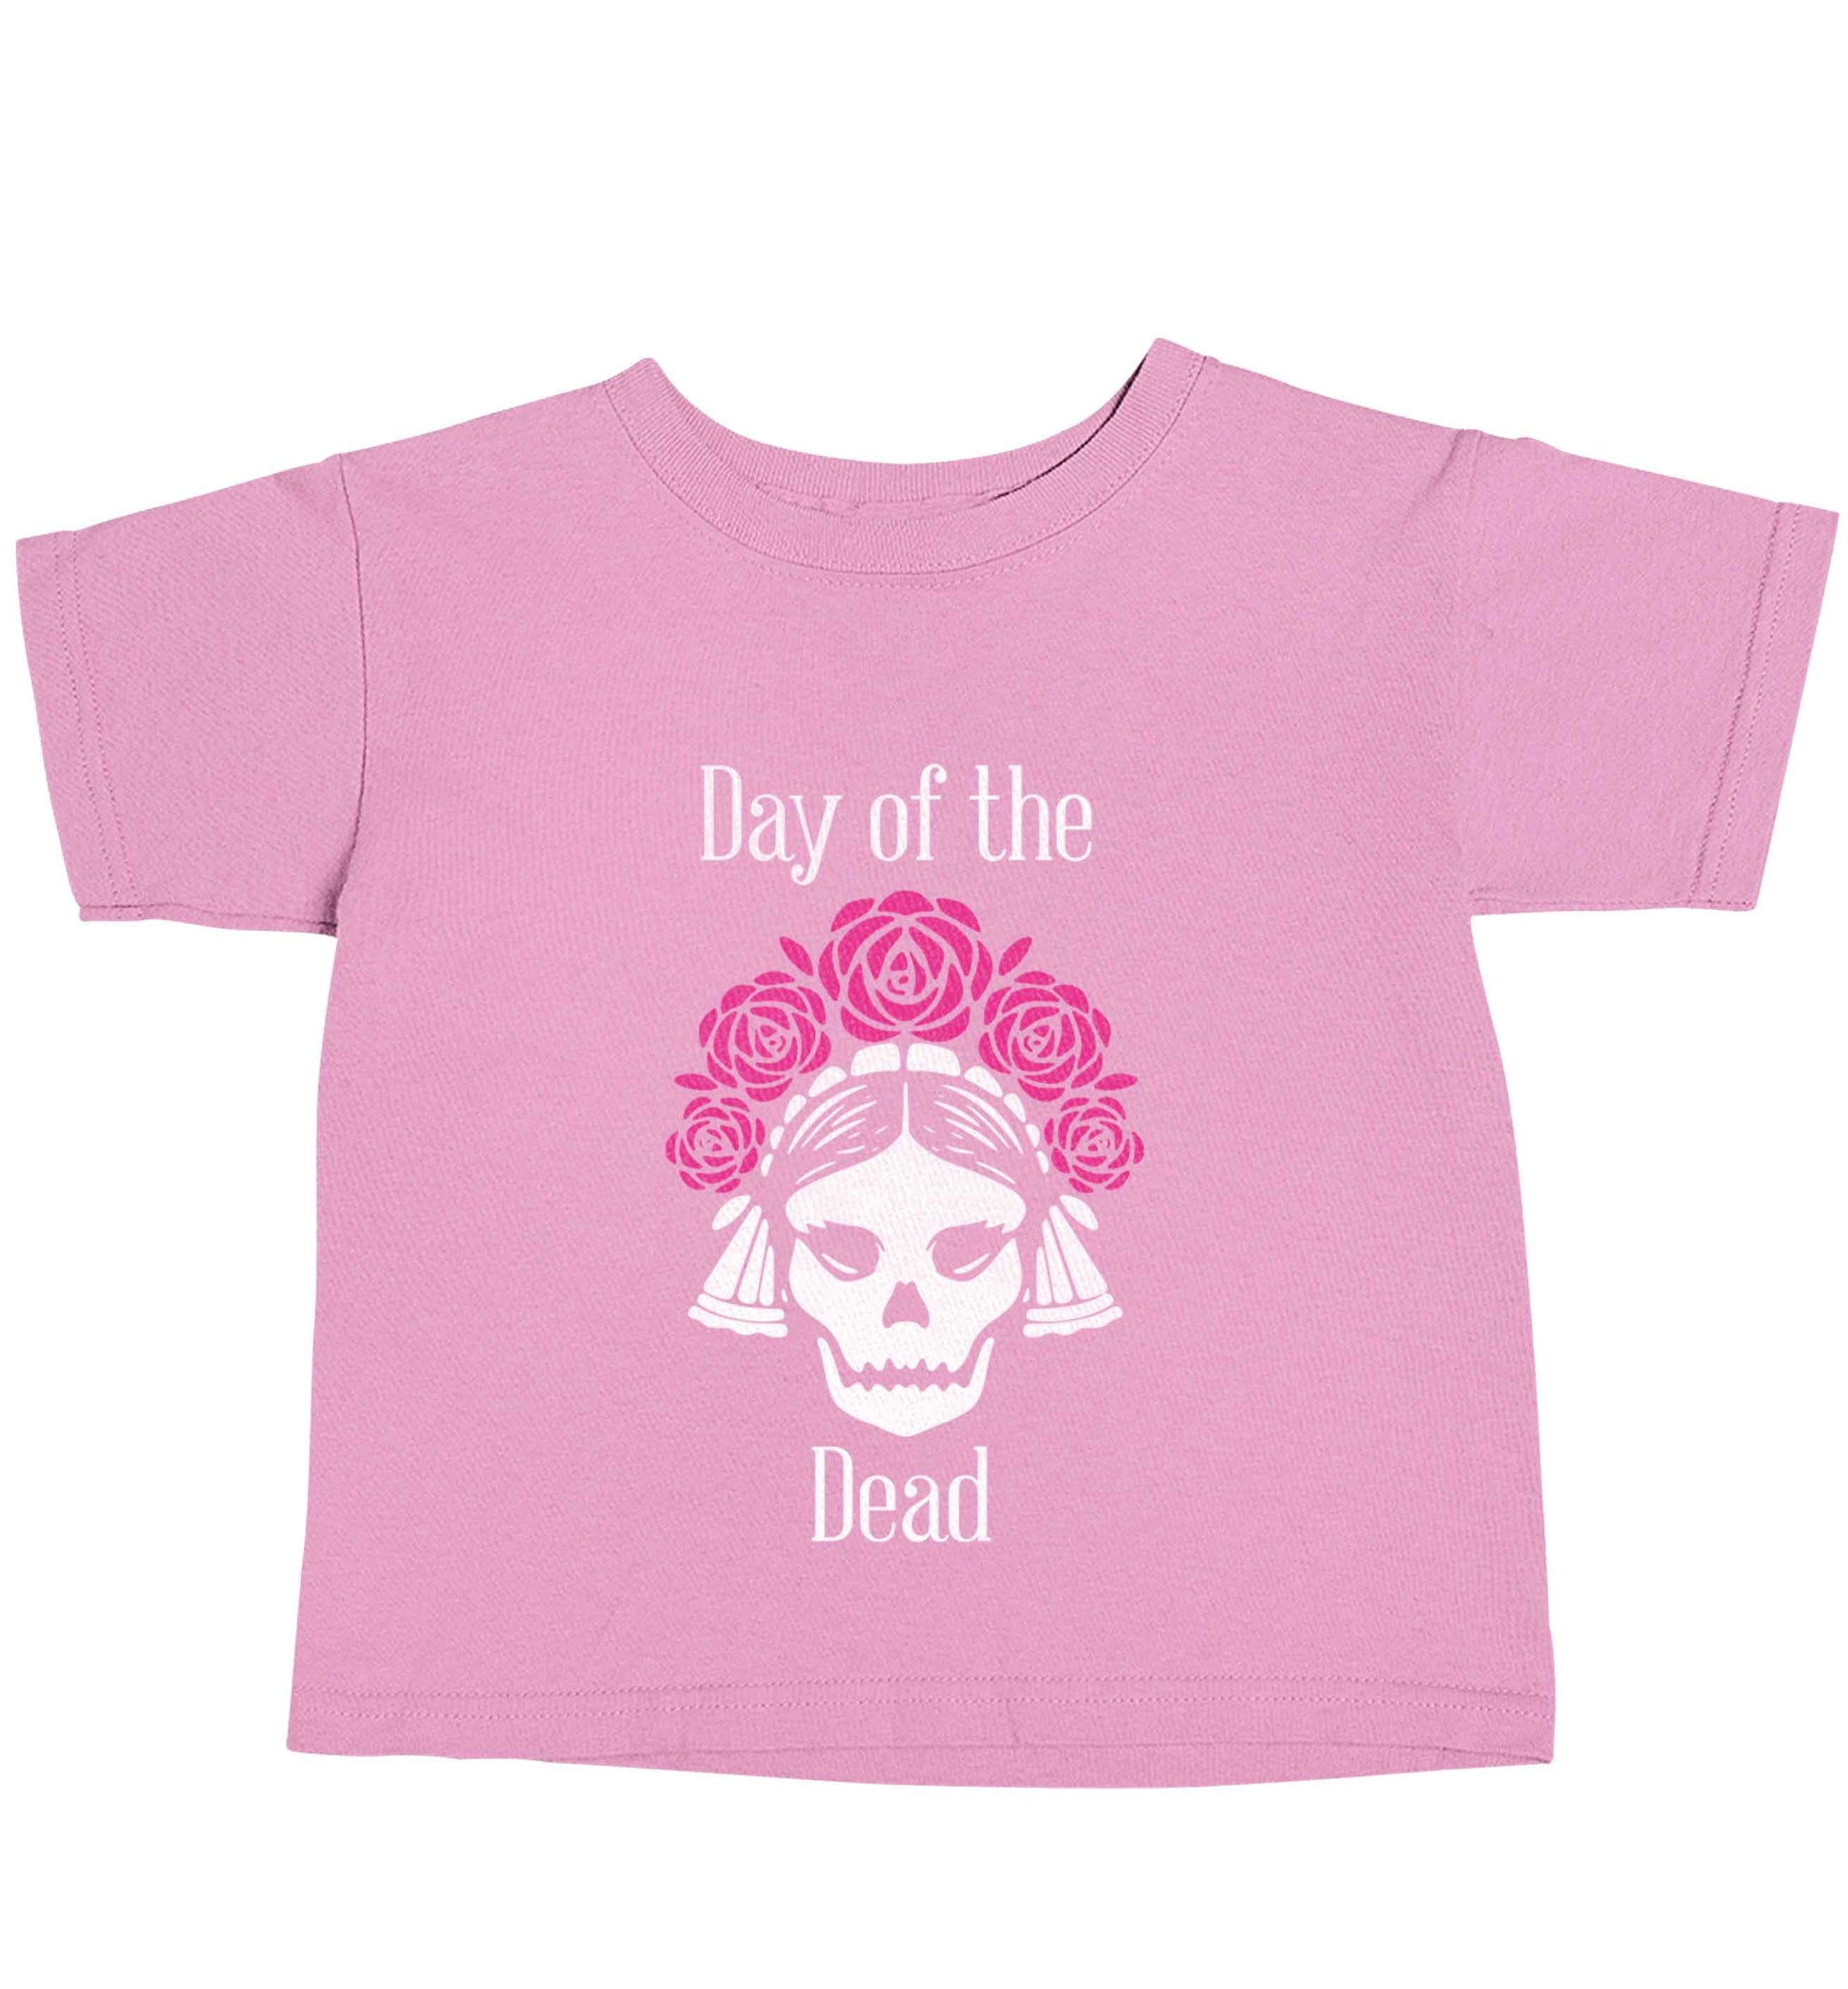 Day of the dead light pink baby toddler Tshirt 2 Years